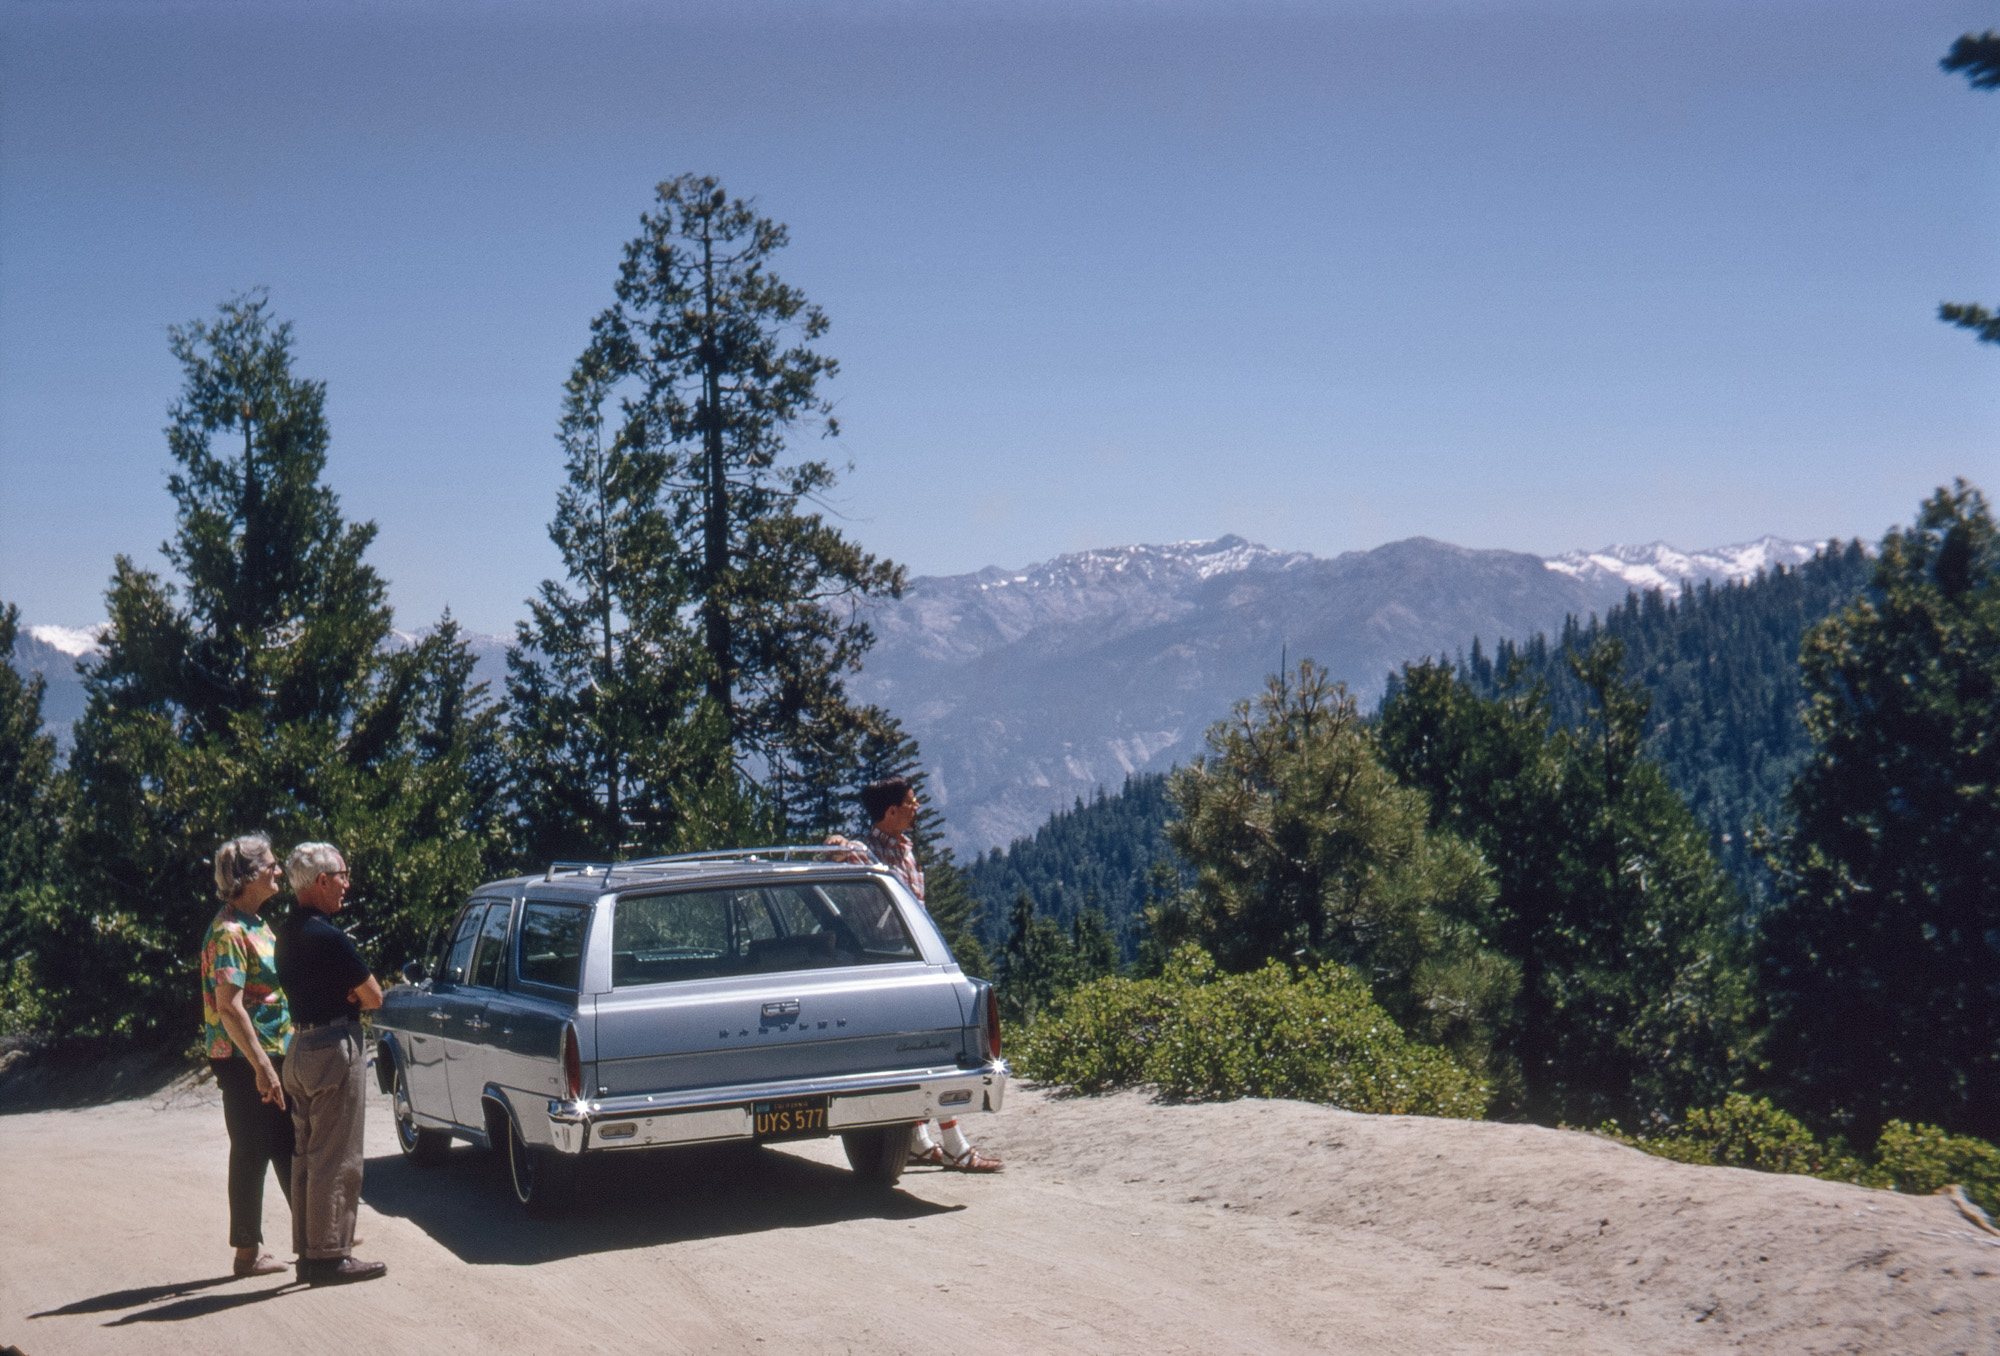 Summer 1967. Just think how much more exciting this shot of my mother, father and brother enjoying a Kodachrome vista of the Sierra Nevada would be if, instead of our sedate 1966 Rambler, we had a red 1960 Chevy wagon. View full size.